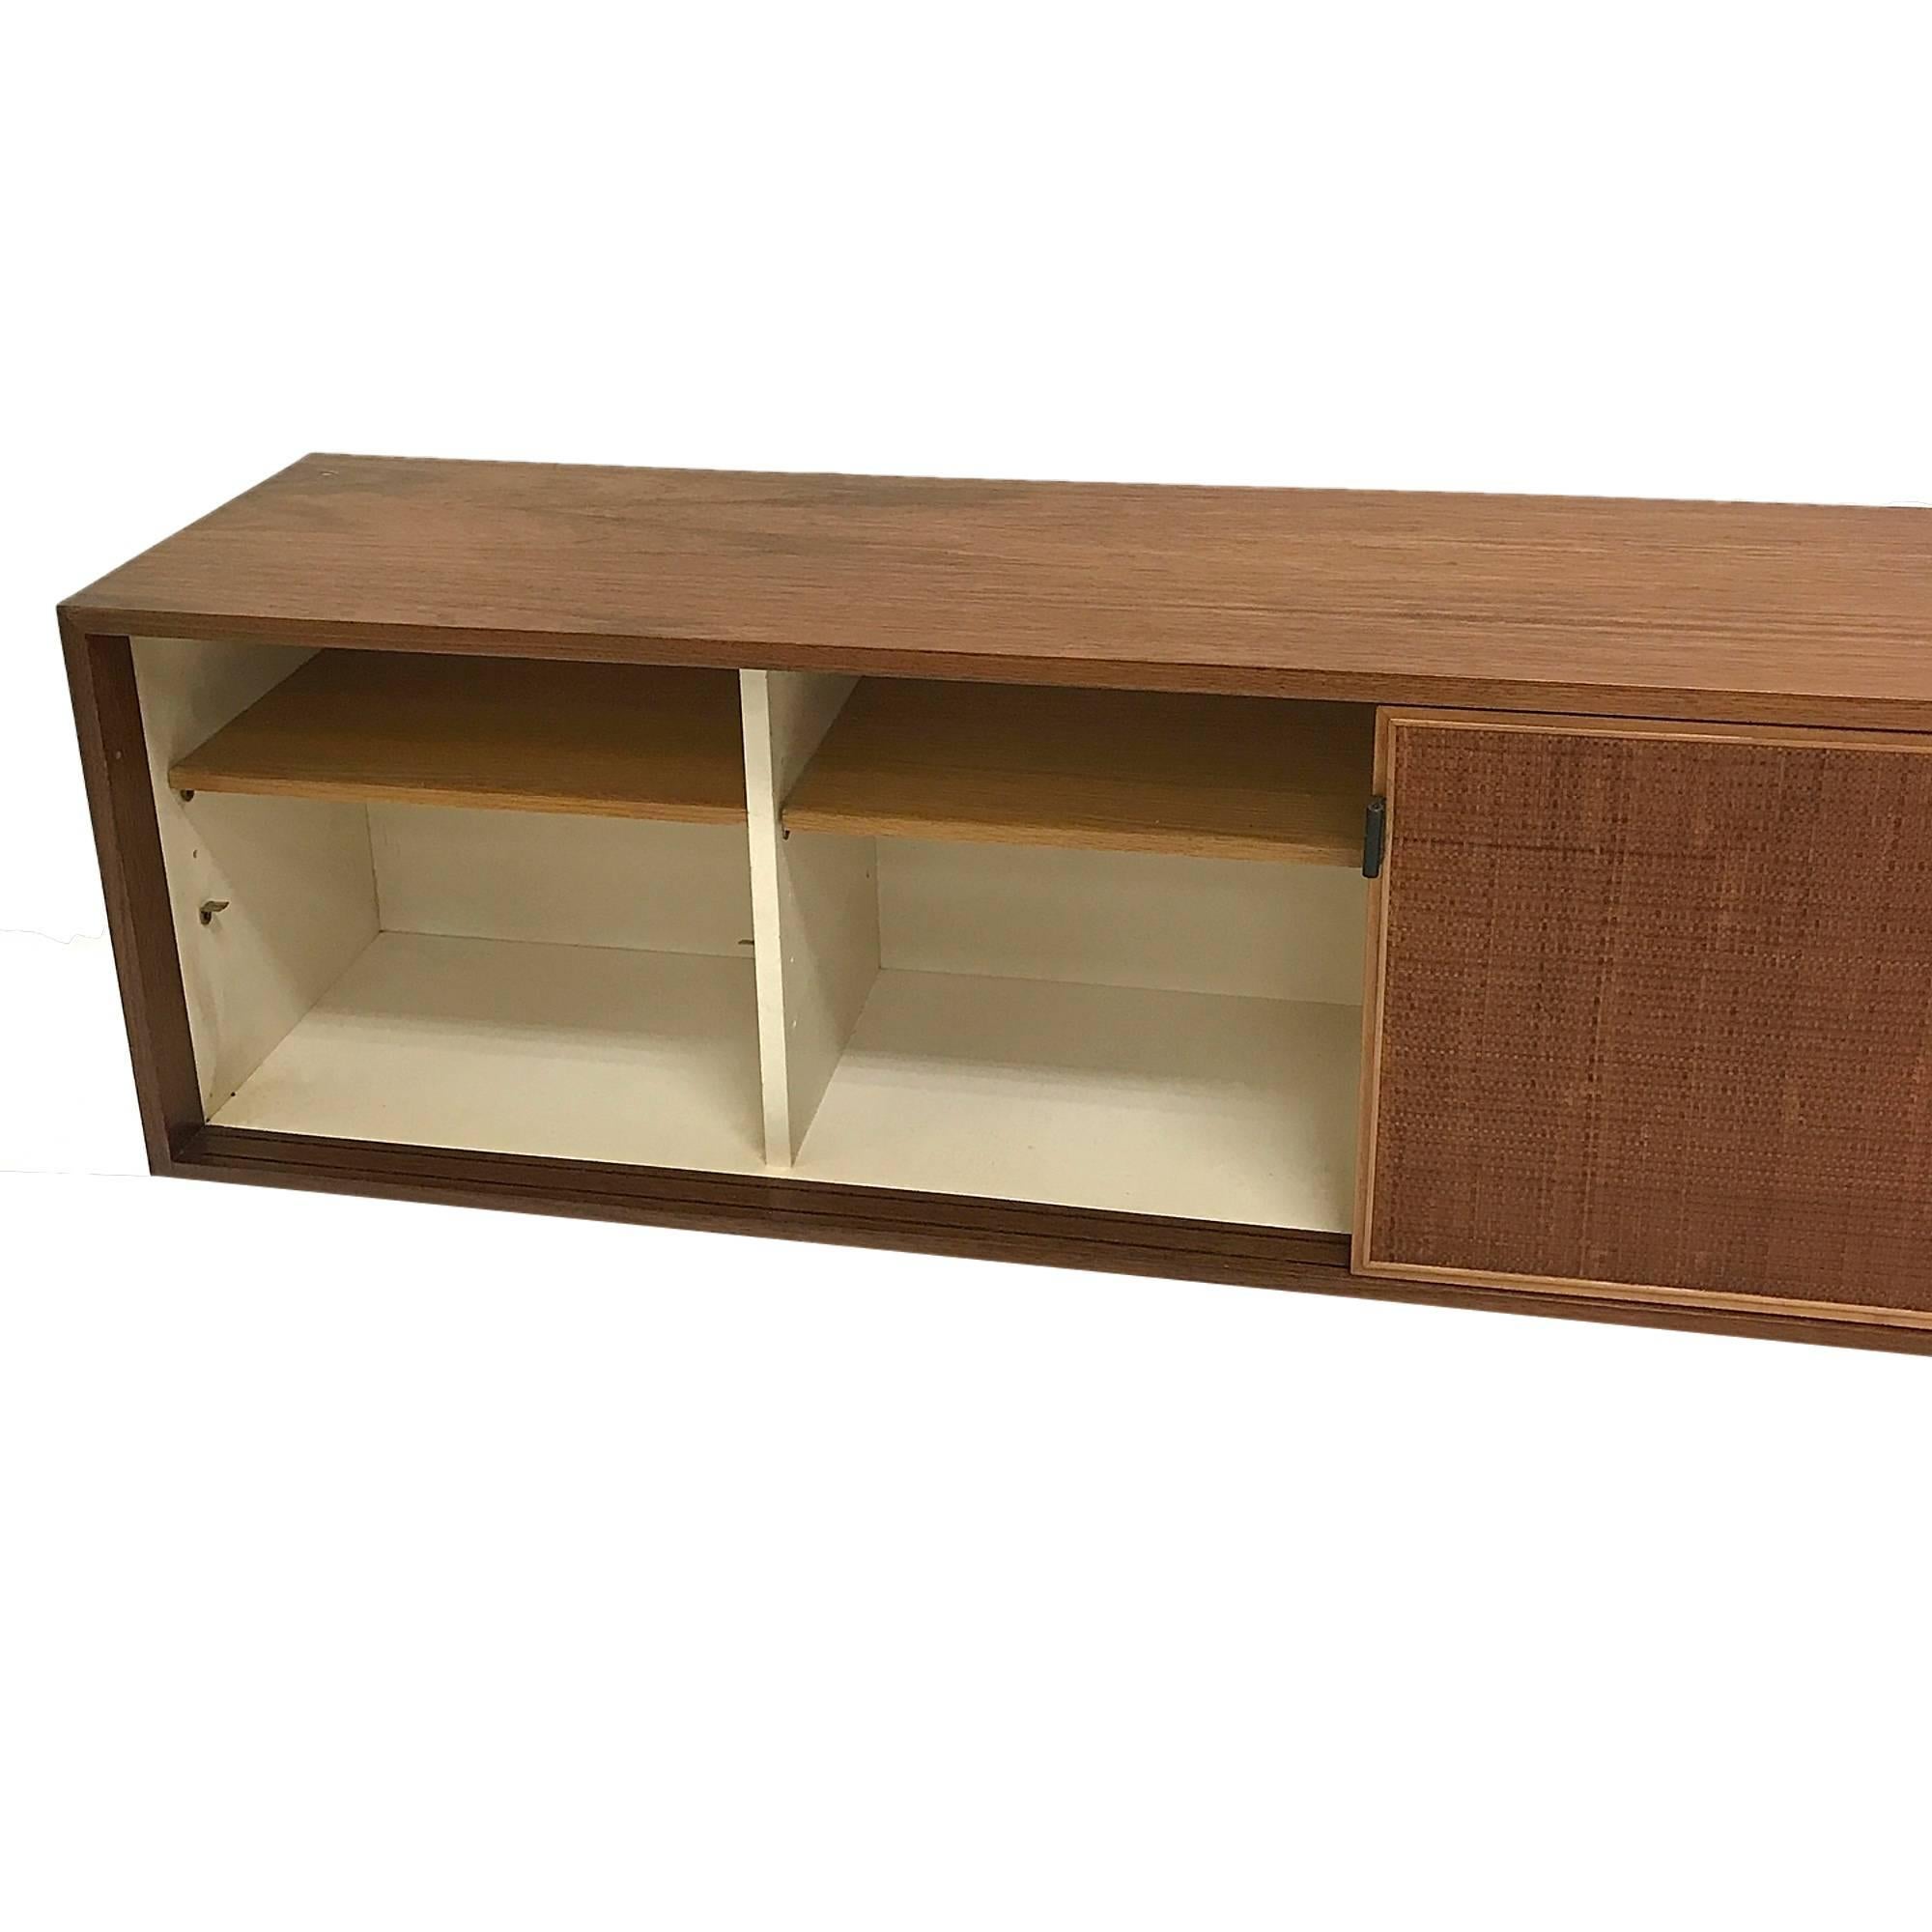 20th Century Florence Knoll Wall Hanging Credenza in Walnut with Cane Doors and Oak Shelves